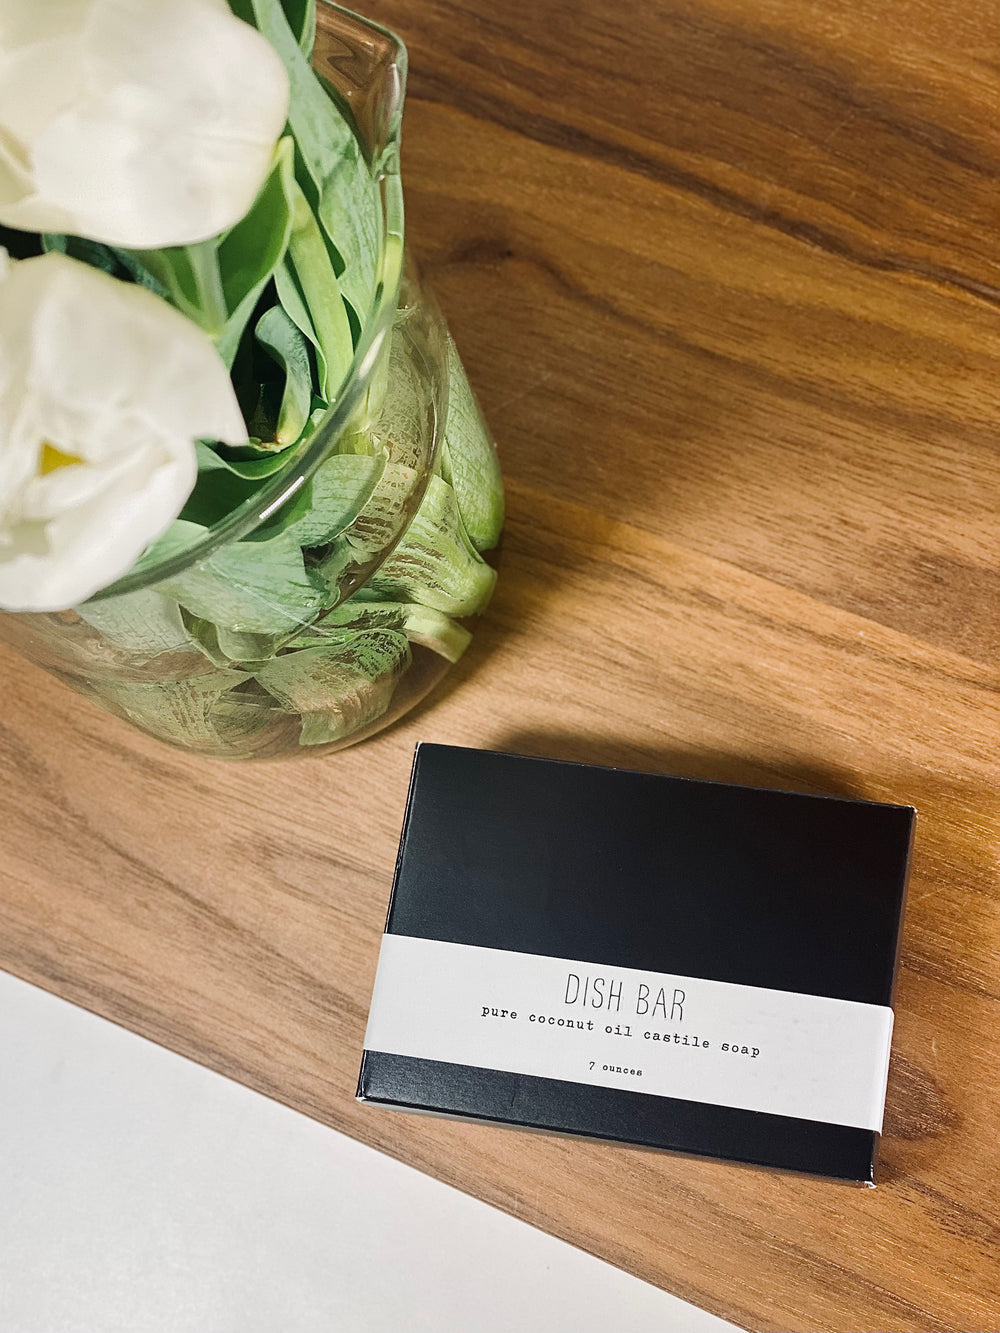 Black small box of bar soap on a wooden table next to a white flower in a vase